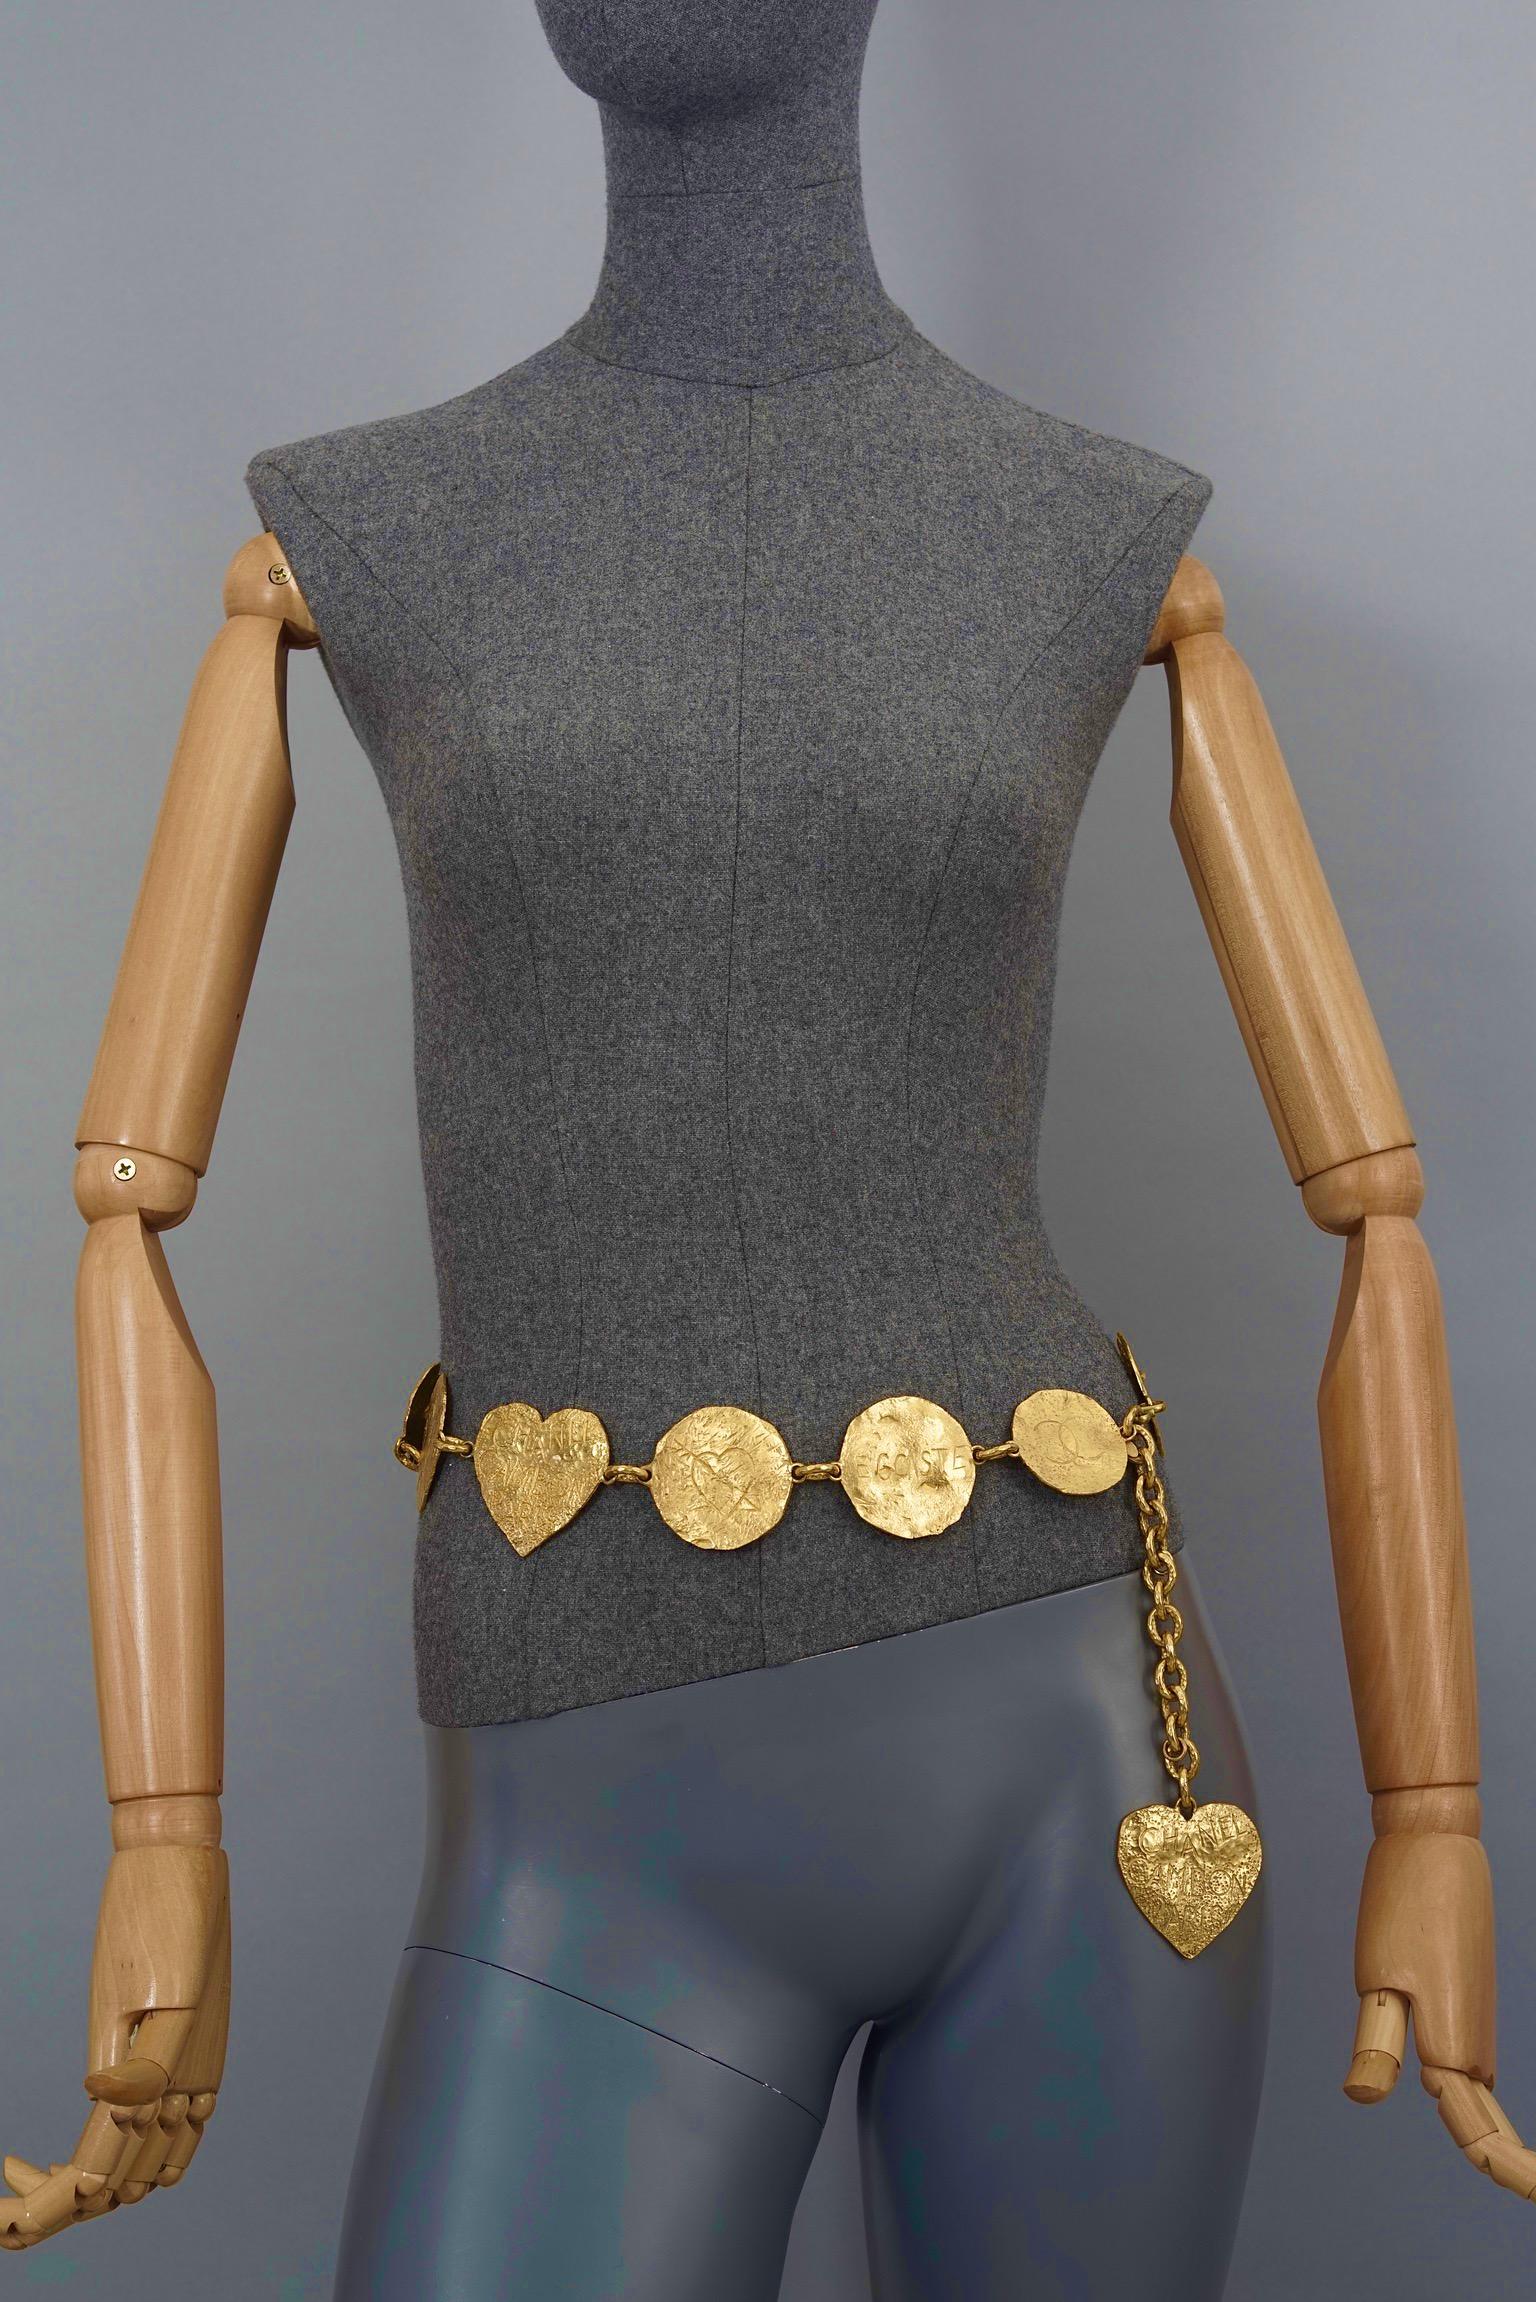 Vintage Massive 1993 CHANEL Logo Graffiti Medallion Heart Charm Belt

Measurements:
Height: 2.20 inches (5.6 cm) 
Maximum Wearable Length: 33.46 inches (85 cm) adjustable

Features:
- 100% Authentic CHANEL from 1993 Cruise Collection.
- 12 Graffiti